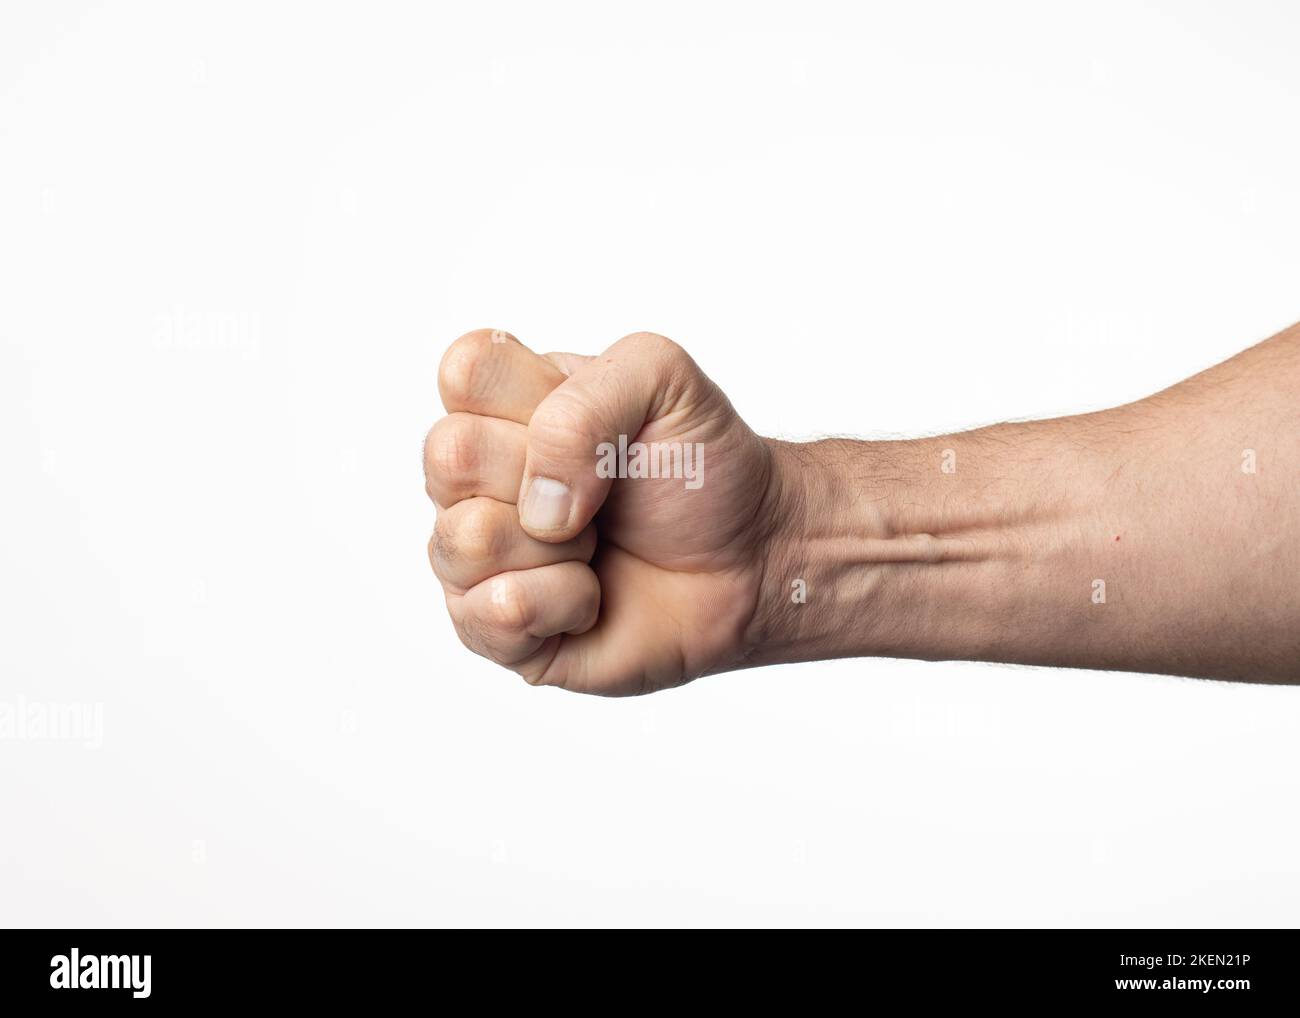 A man's hand and arm on a nuclear white background, showing a gesture of greeting approval or positivity. Stock Photo